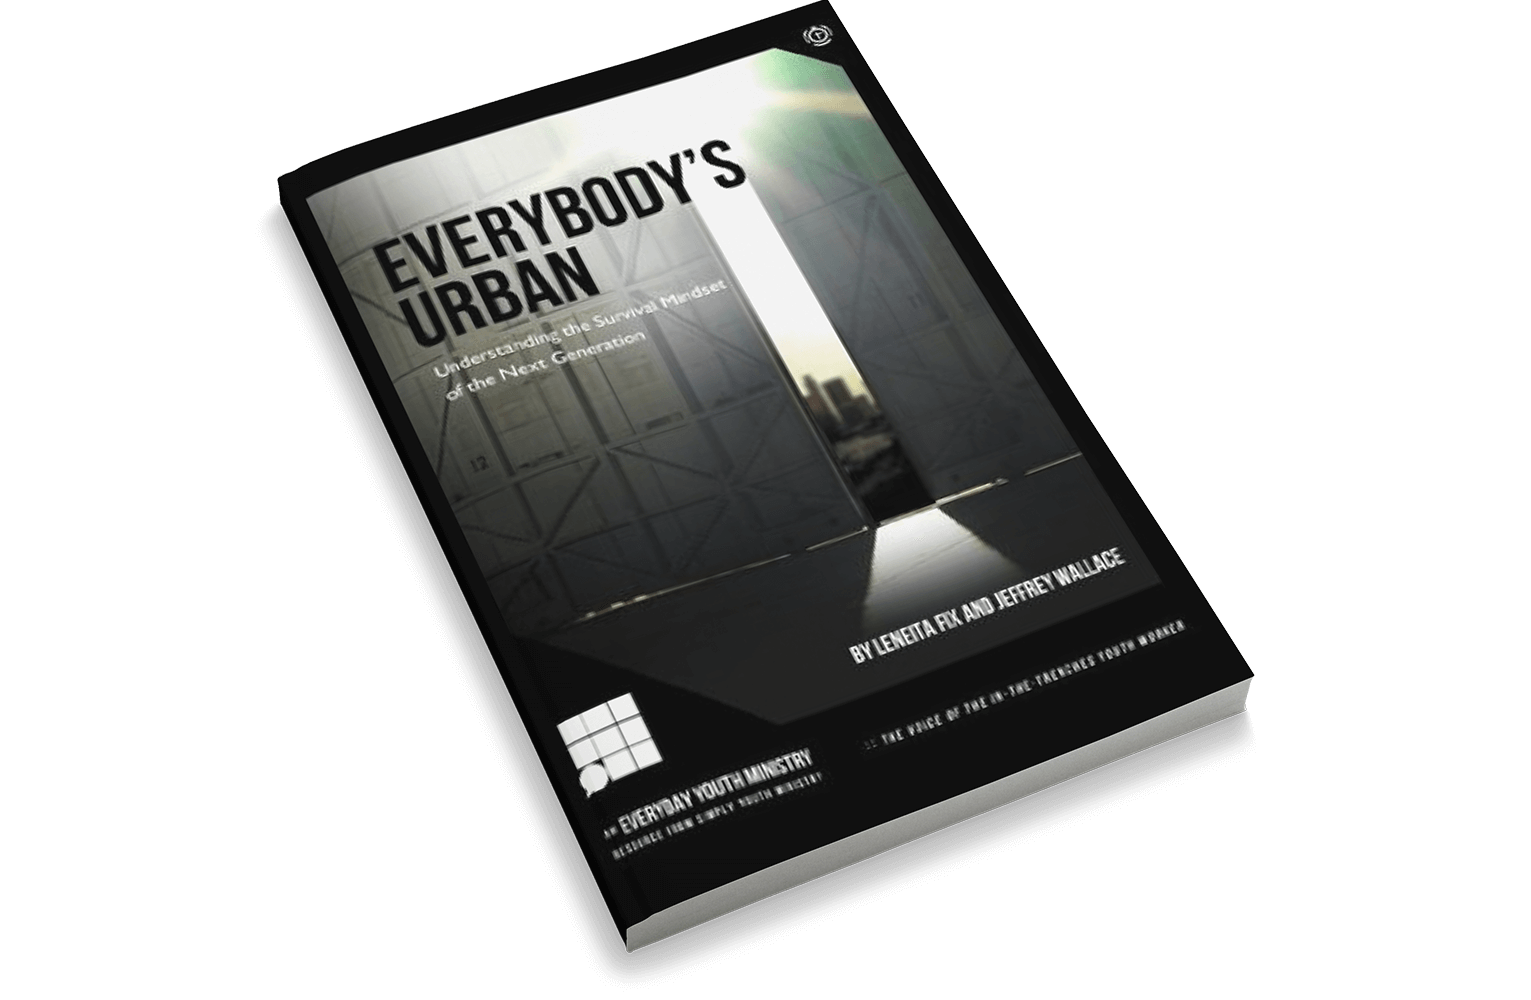 Everybody's Urban: Understanding the Survival Mindset of the Next Generation